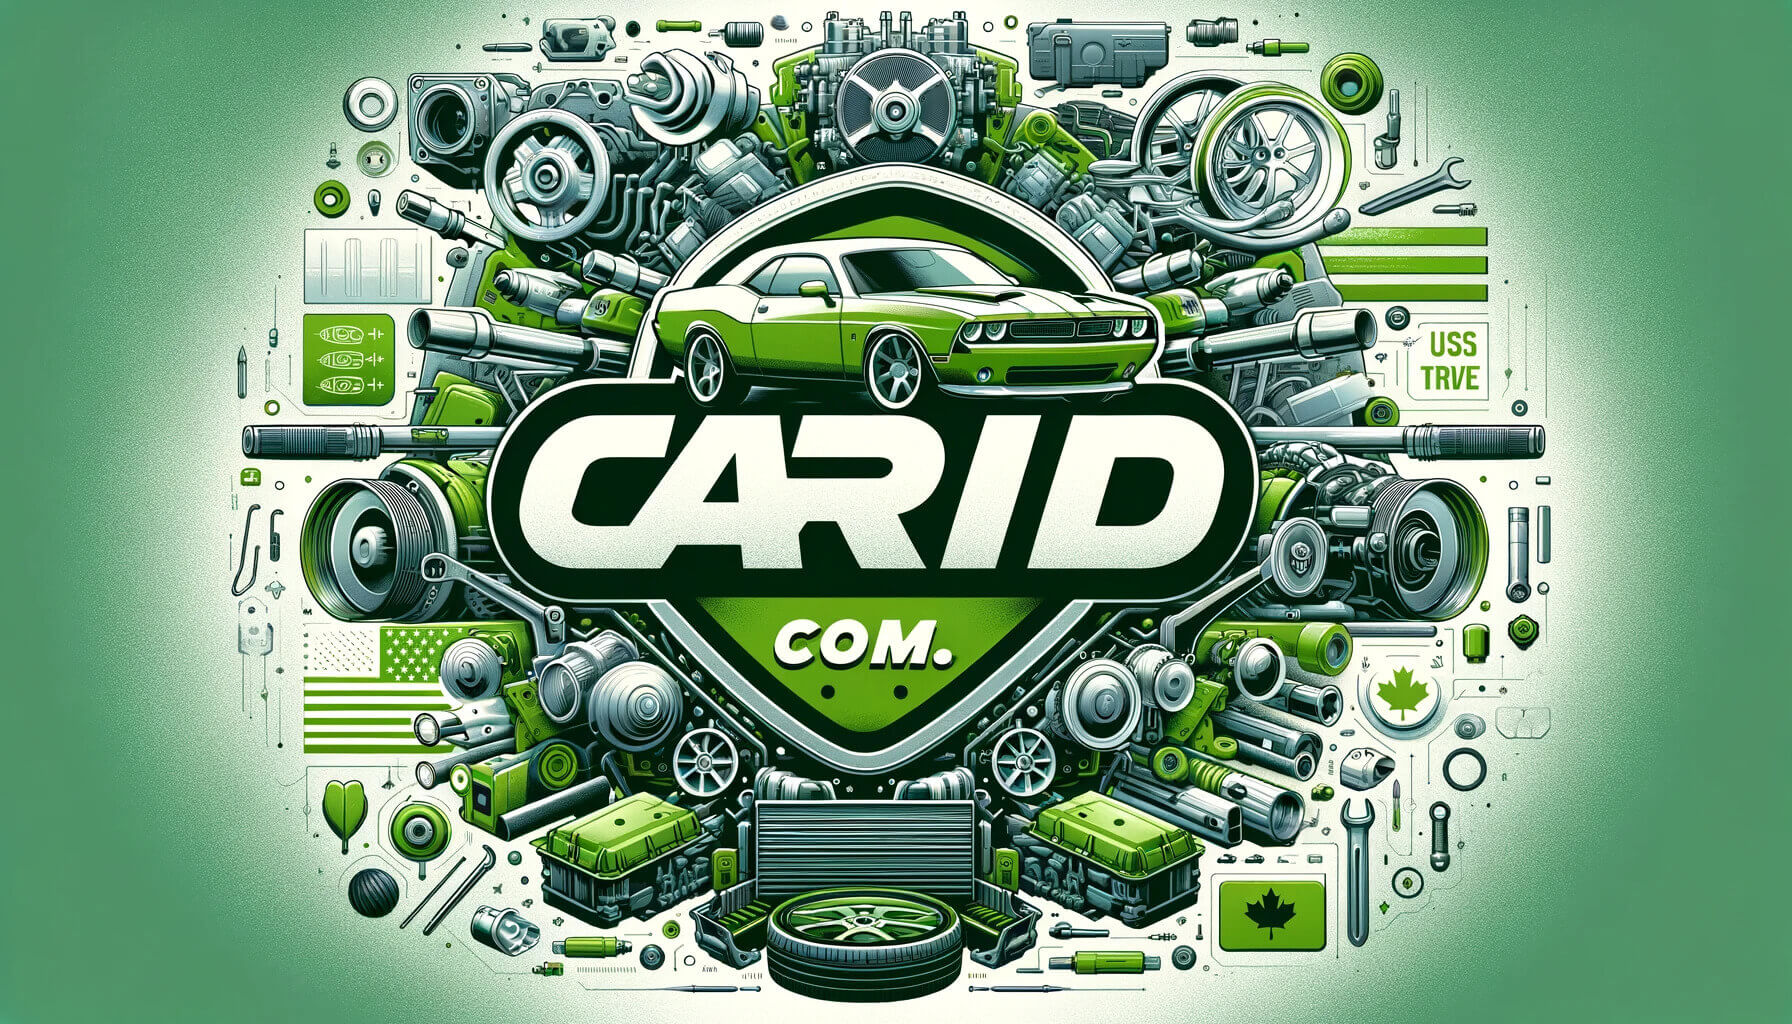 Carid.com - Your One-Stop Auto Parts Store